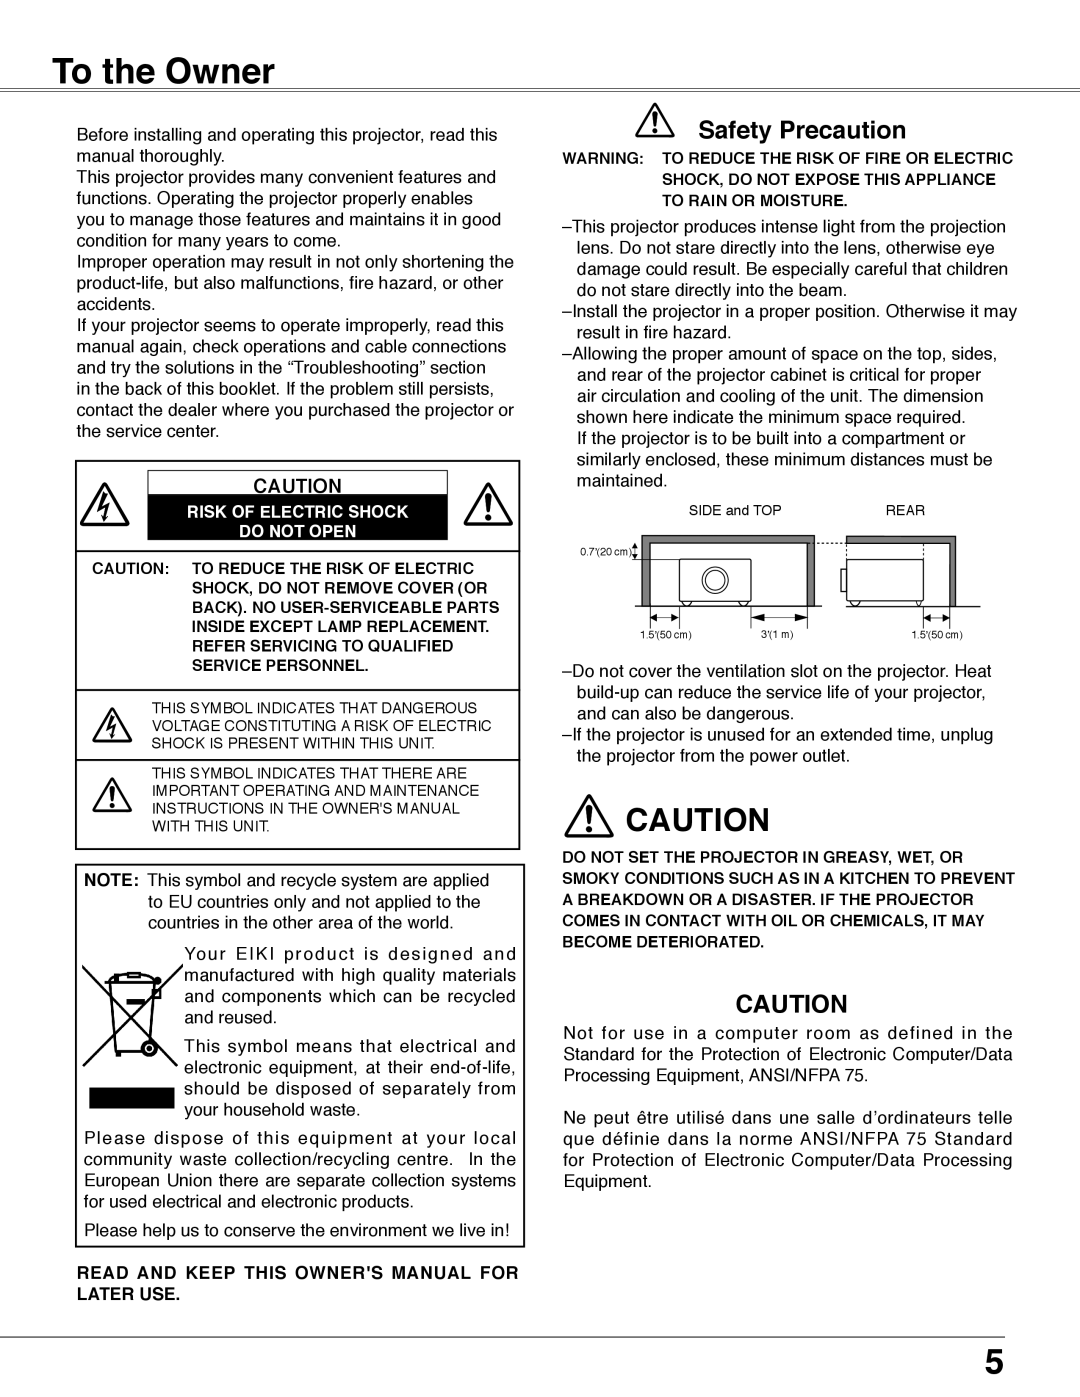 Eiki LC-WB40N owner manual To the Owner, Safety Precaution, Risk Of Electric Shock Do Not Open 